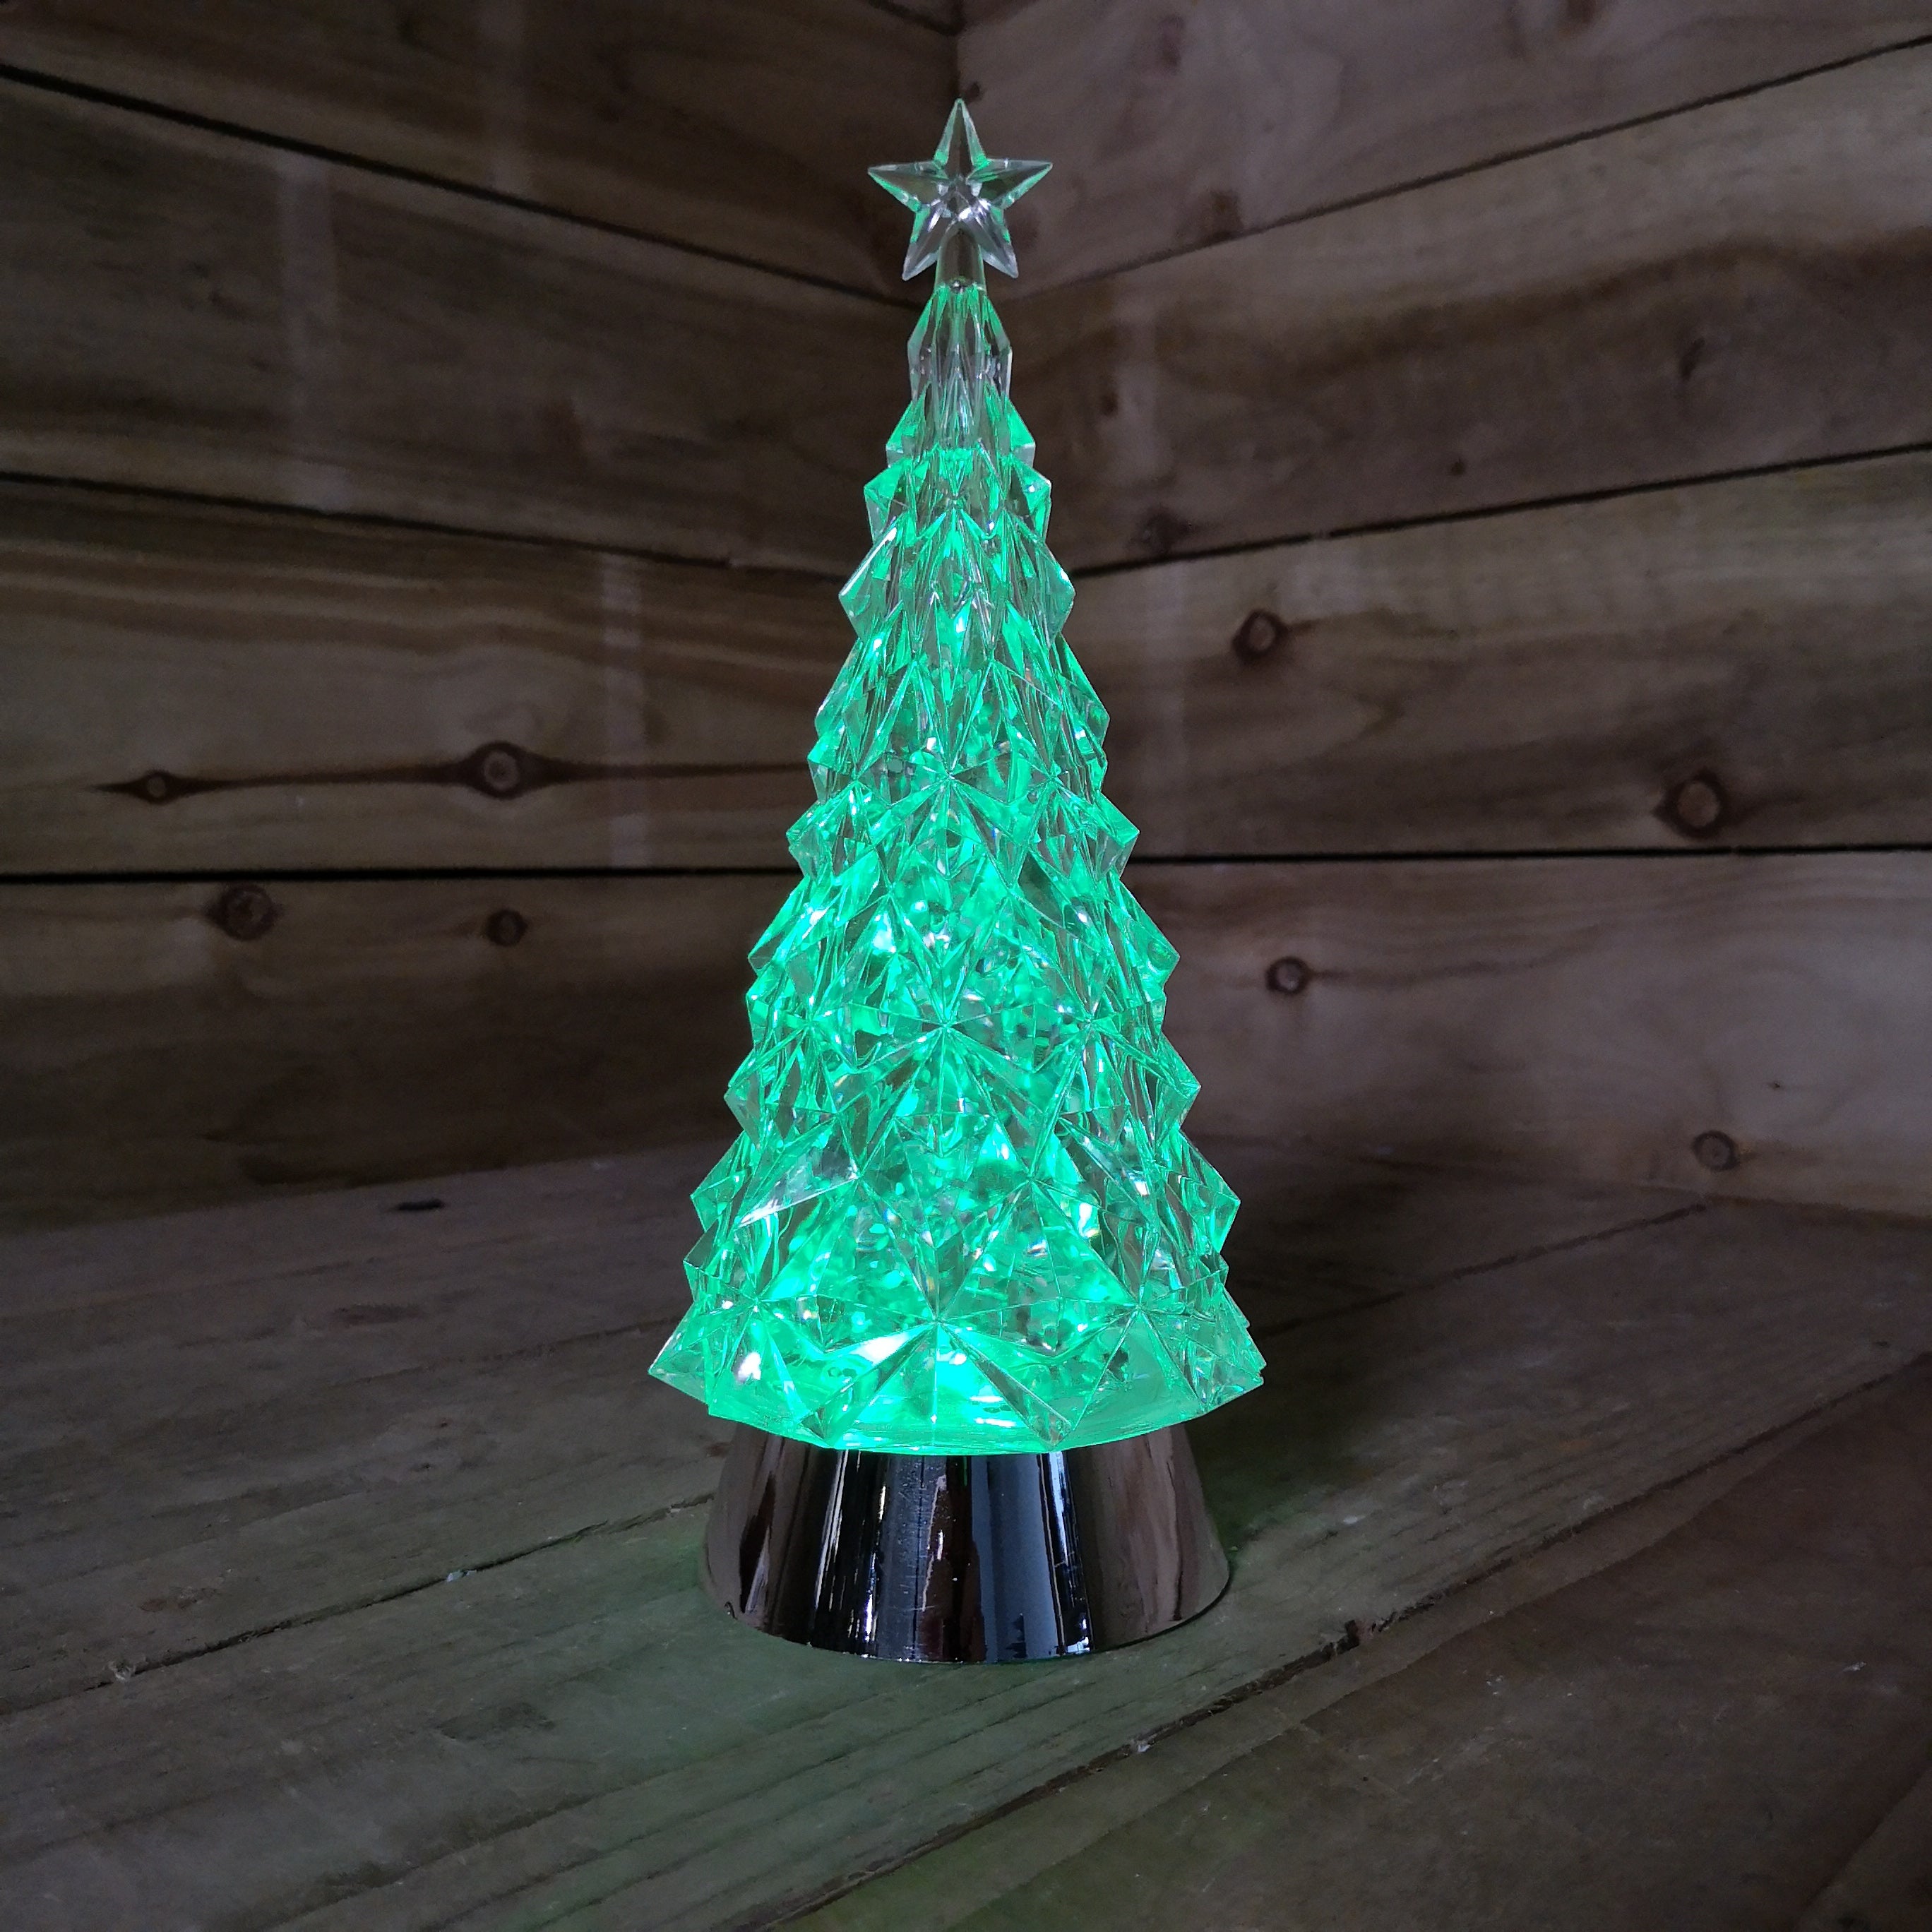 28cm RGB LED Christmas Tree Water Lantern Spinner Battery Operated